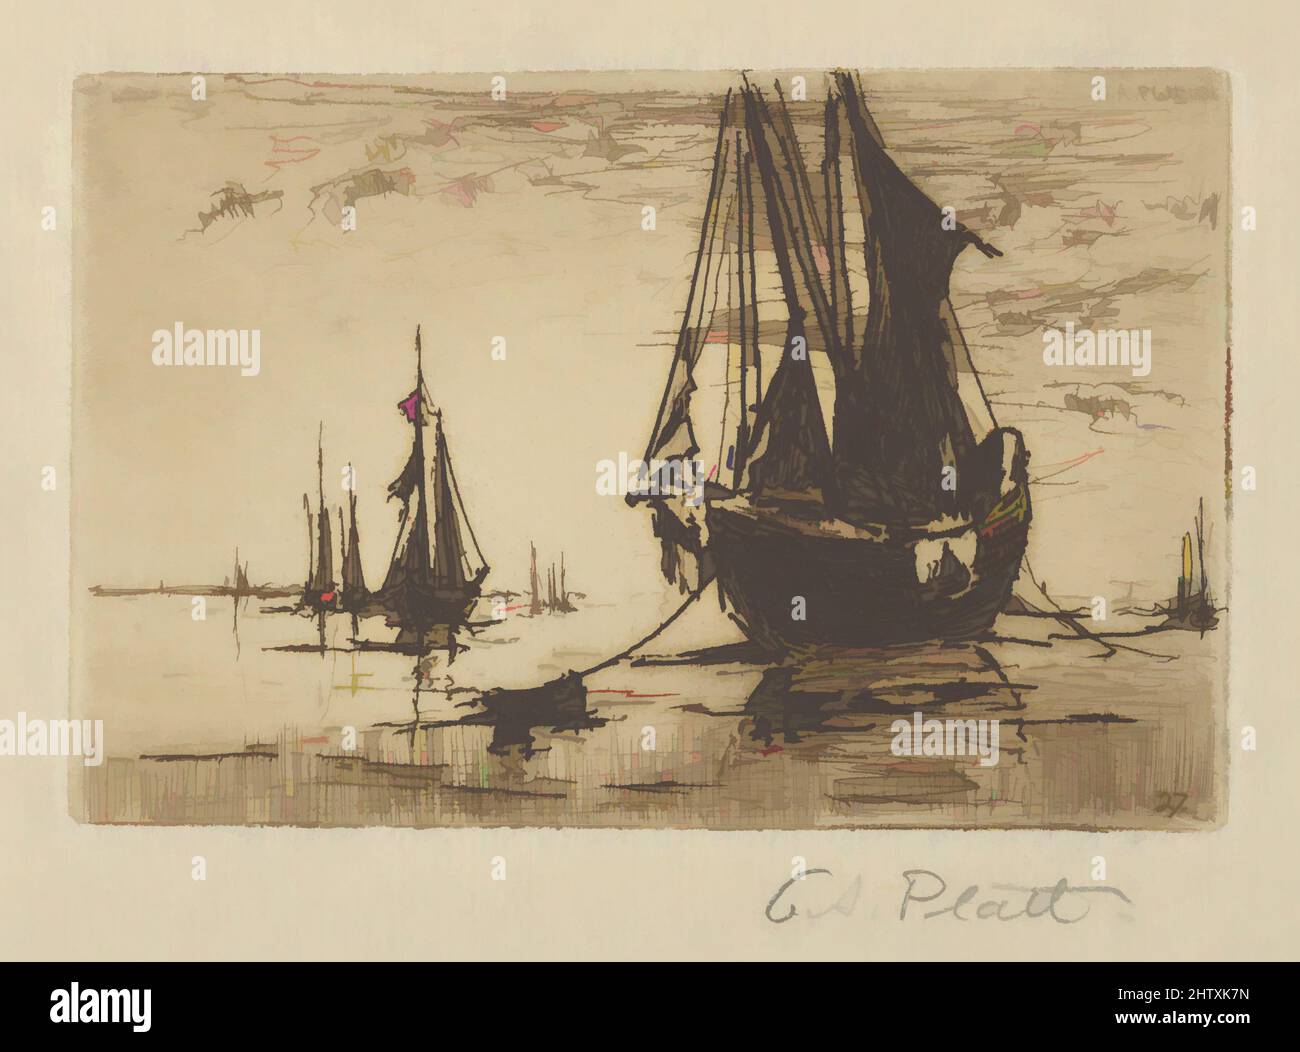 Art inspired by Sketch of a Boat, 1881, Etching; trial proof, plate: 2 3/4 x 4 3/16 in. (7 x 10.6 cm), Prints, Charles Adams Platt (American, New York 1861–1933, Classic works modernized by Artotop with a splash of modernity. Shapes, color and value, eye-catching visual impact on art. Emotions through freedom of artworks in a contemporary way. A timeless message pursuing a wildly creative new direction. Artists turning to the digital medium and creating the Artotop NFT Stock Photo